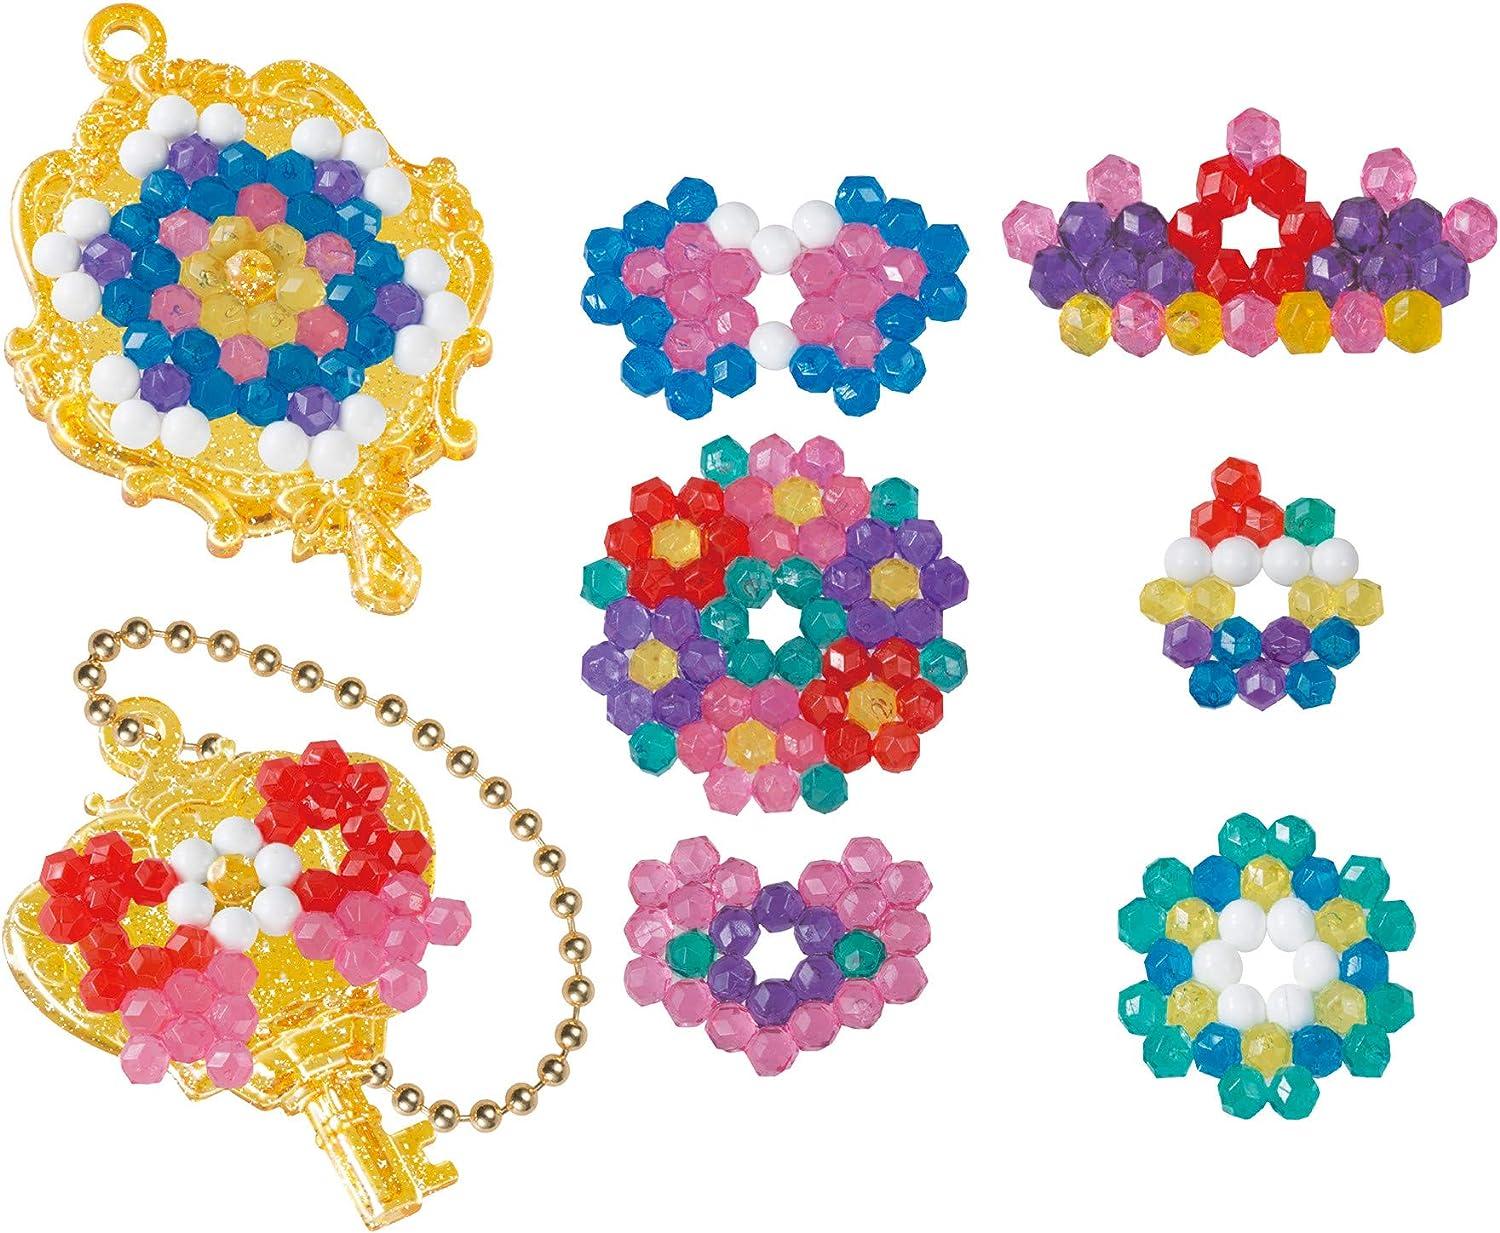 Aquabeads Arts & Crafts Charm Maker Theme Refill with Beads, Templates and  Keychains includes 1 playset